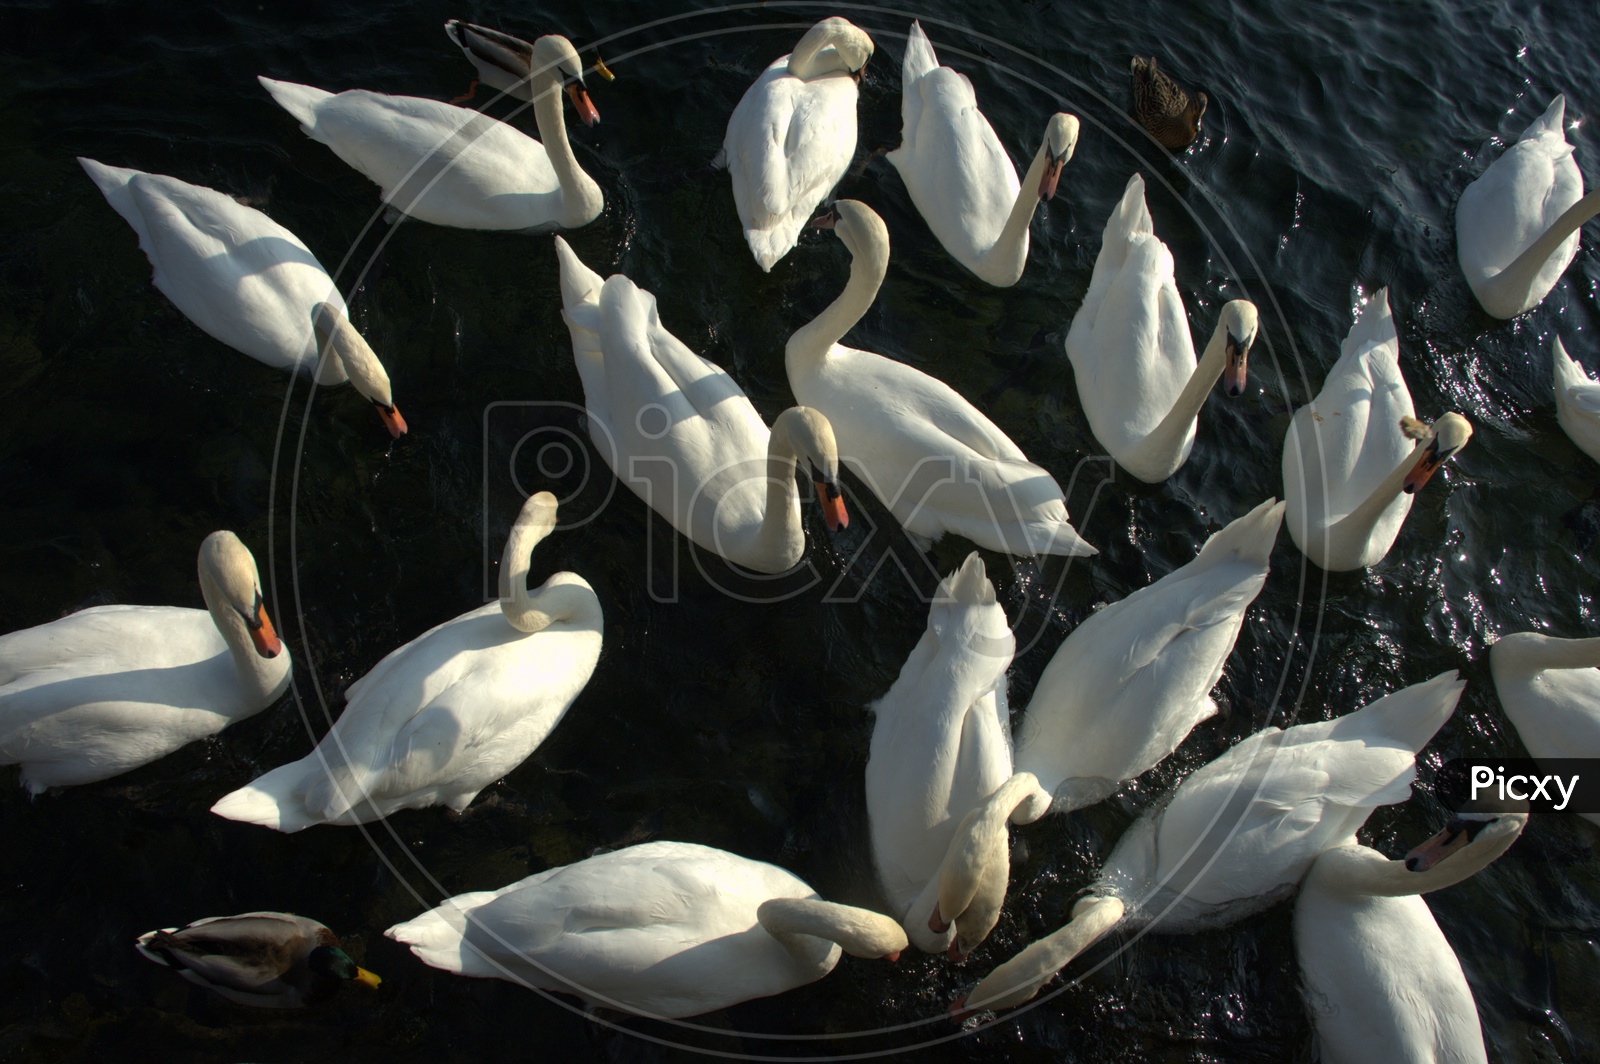 A Wedge of Swans